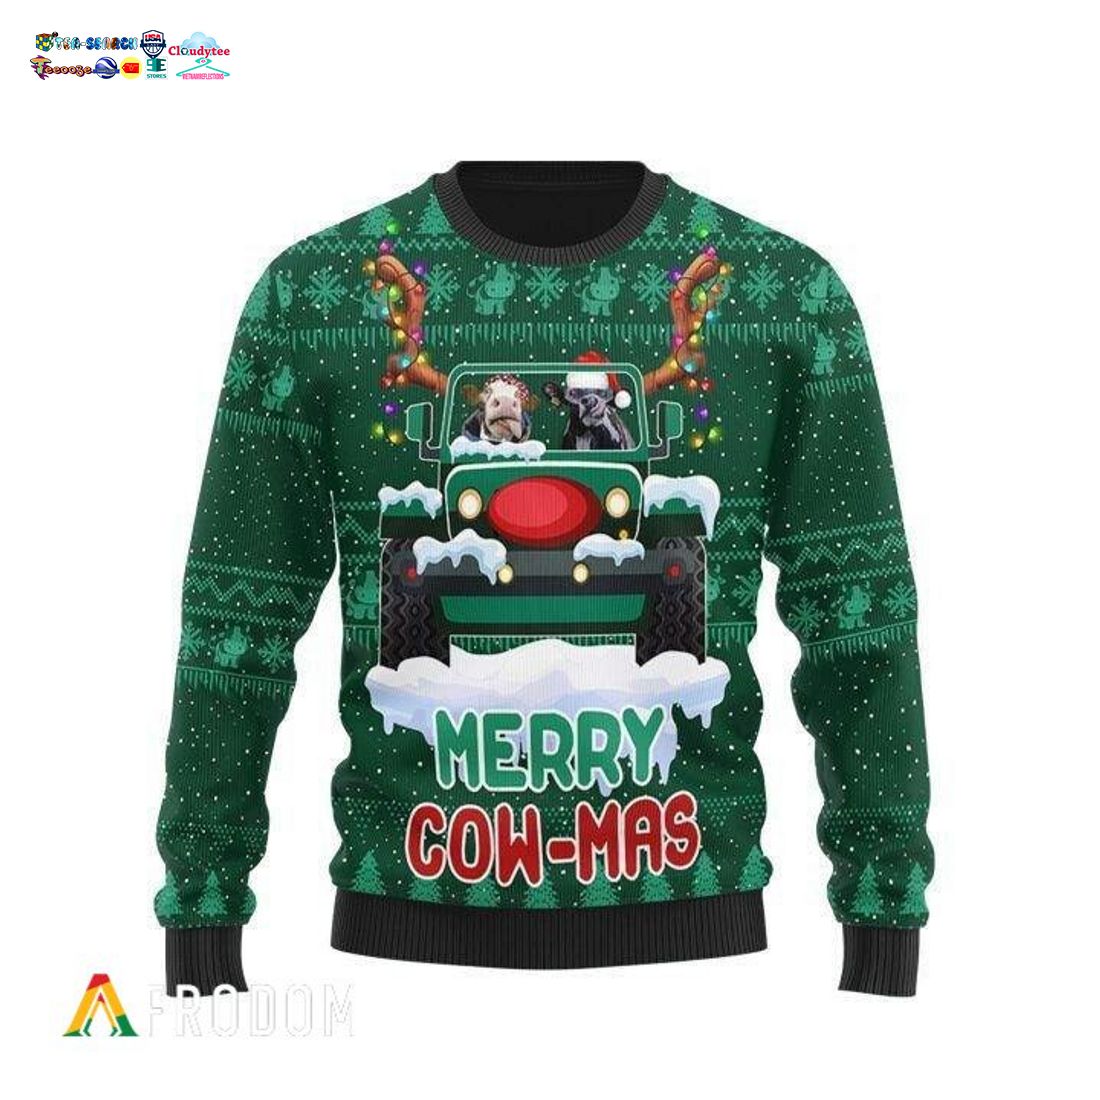 Merry Cow-Mas Ugly Christmas Sweater